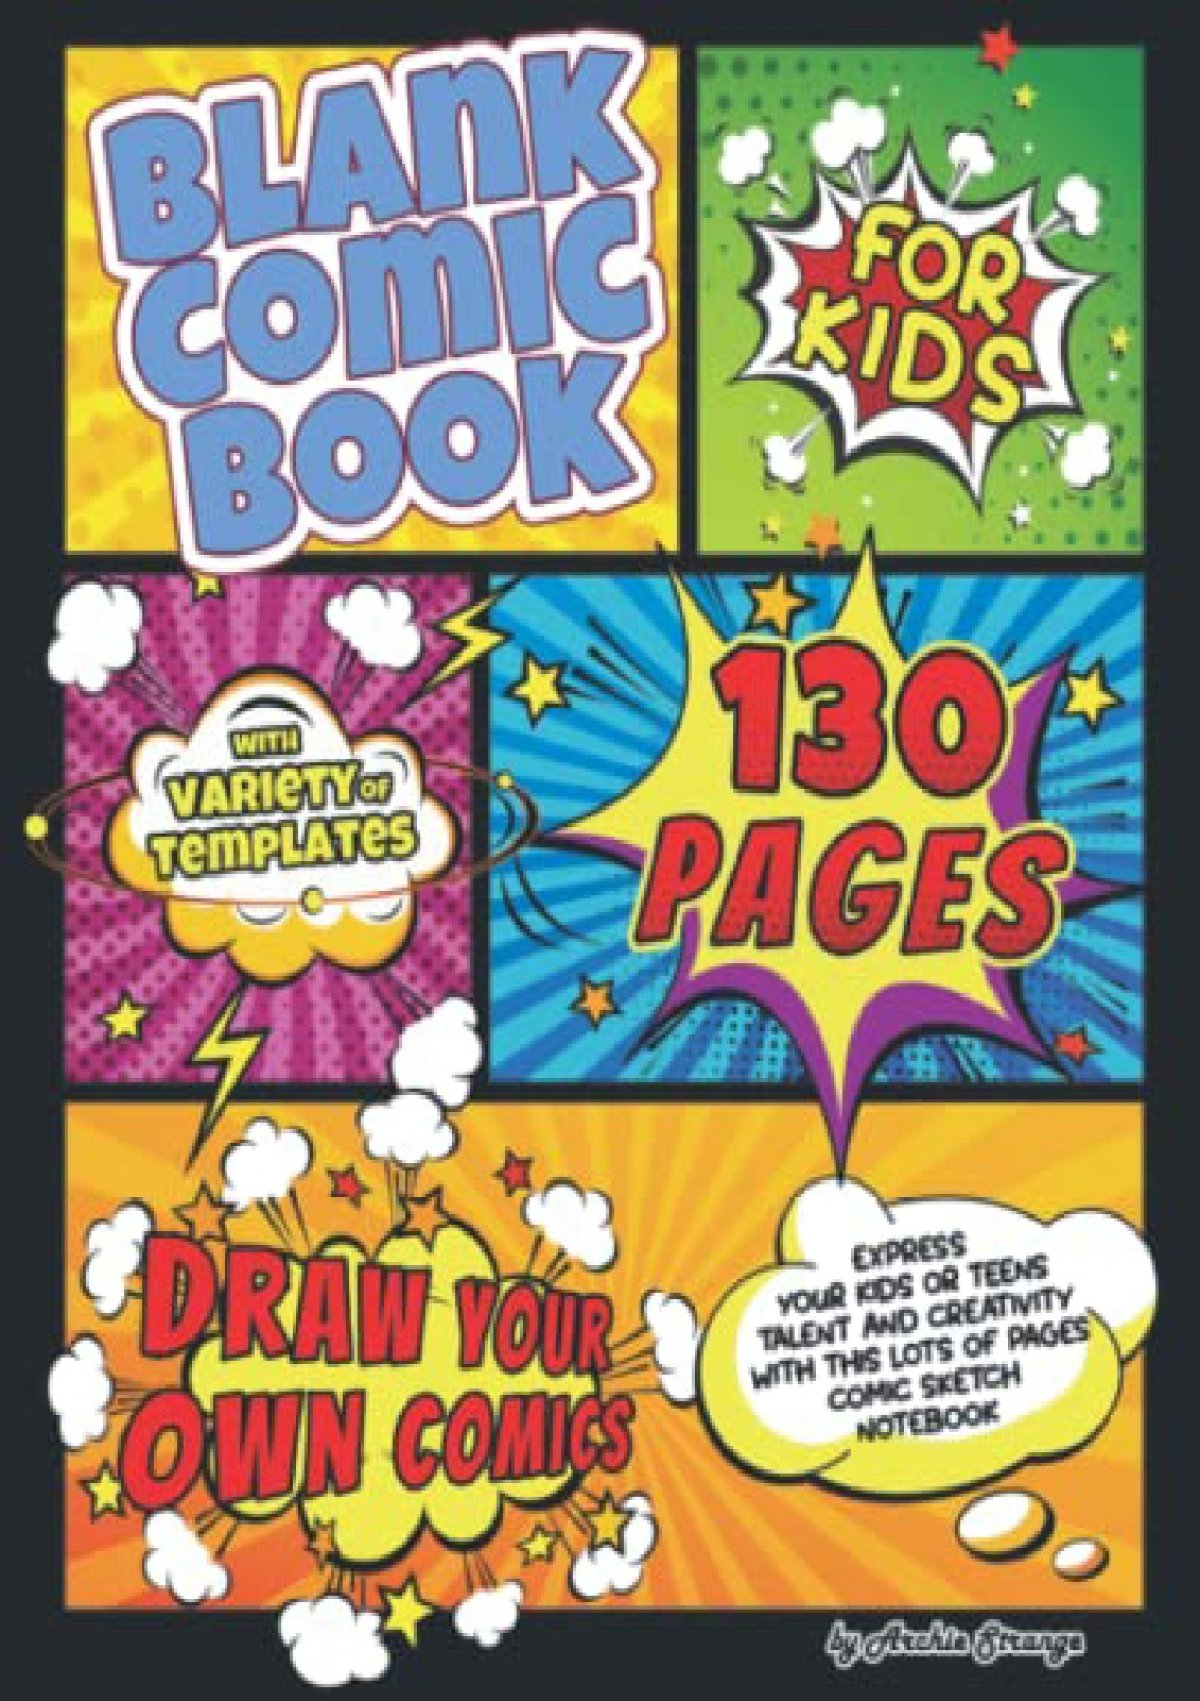 Download free [PDF] Blank Comic Book for Kids with Variety of Templates